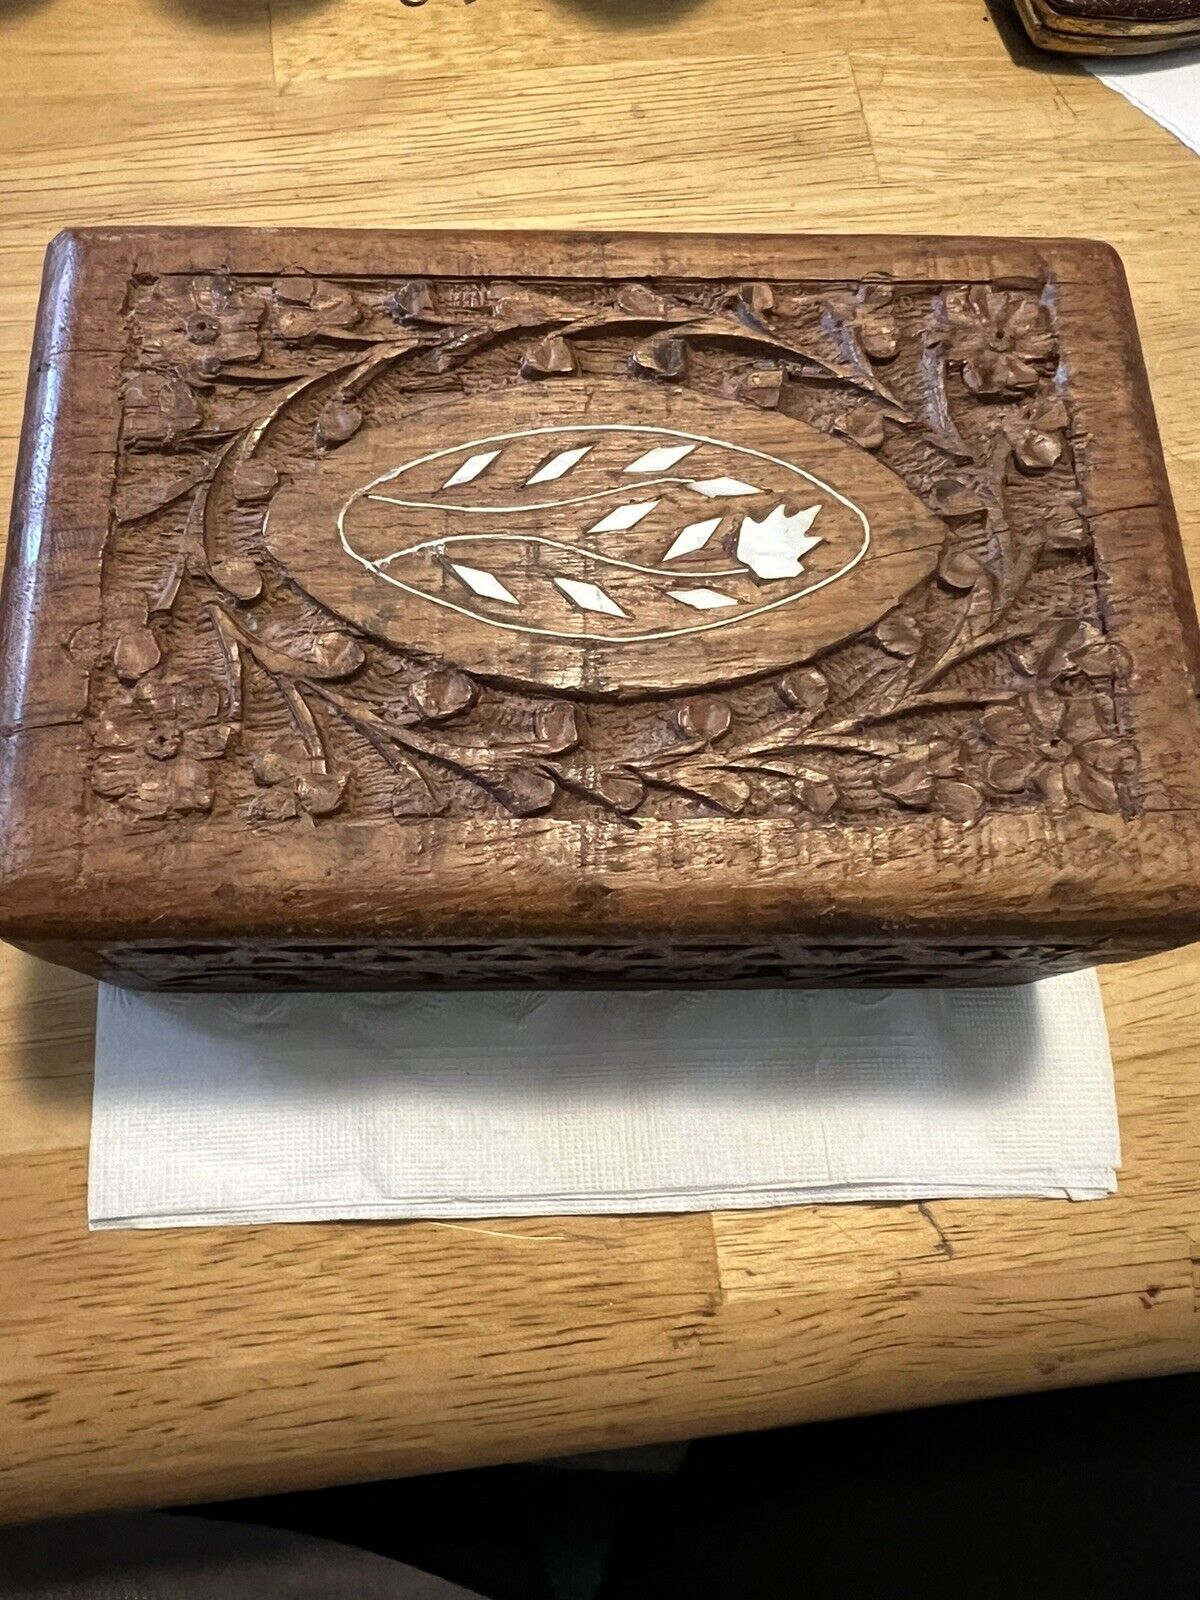 VTG CARVED WOODEN TRINKET BOX  INLAY MOTHER OF PEARL